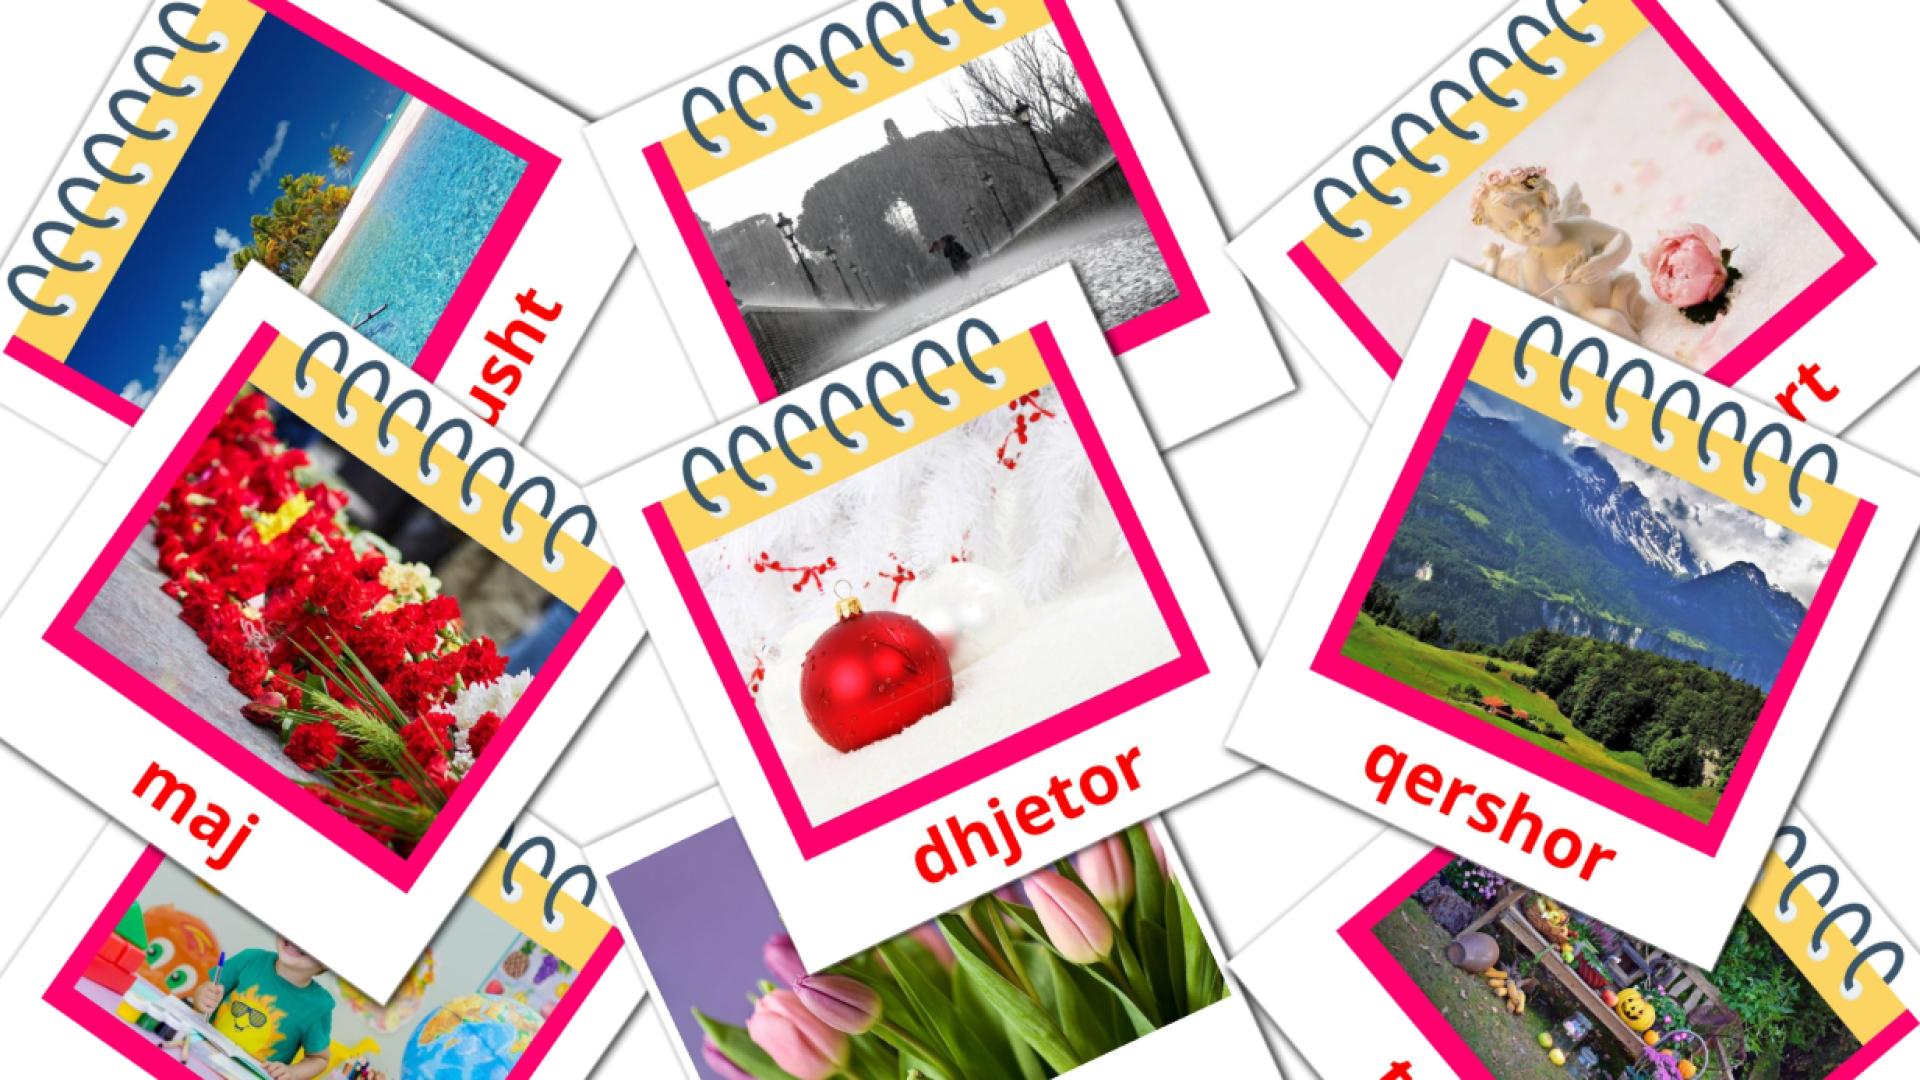 Months of the Year - albanian vocabulary cards